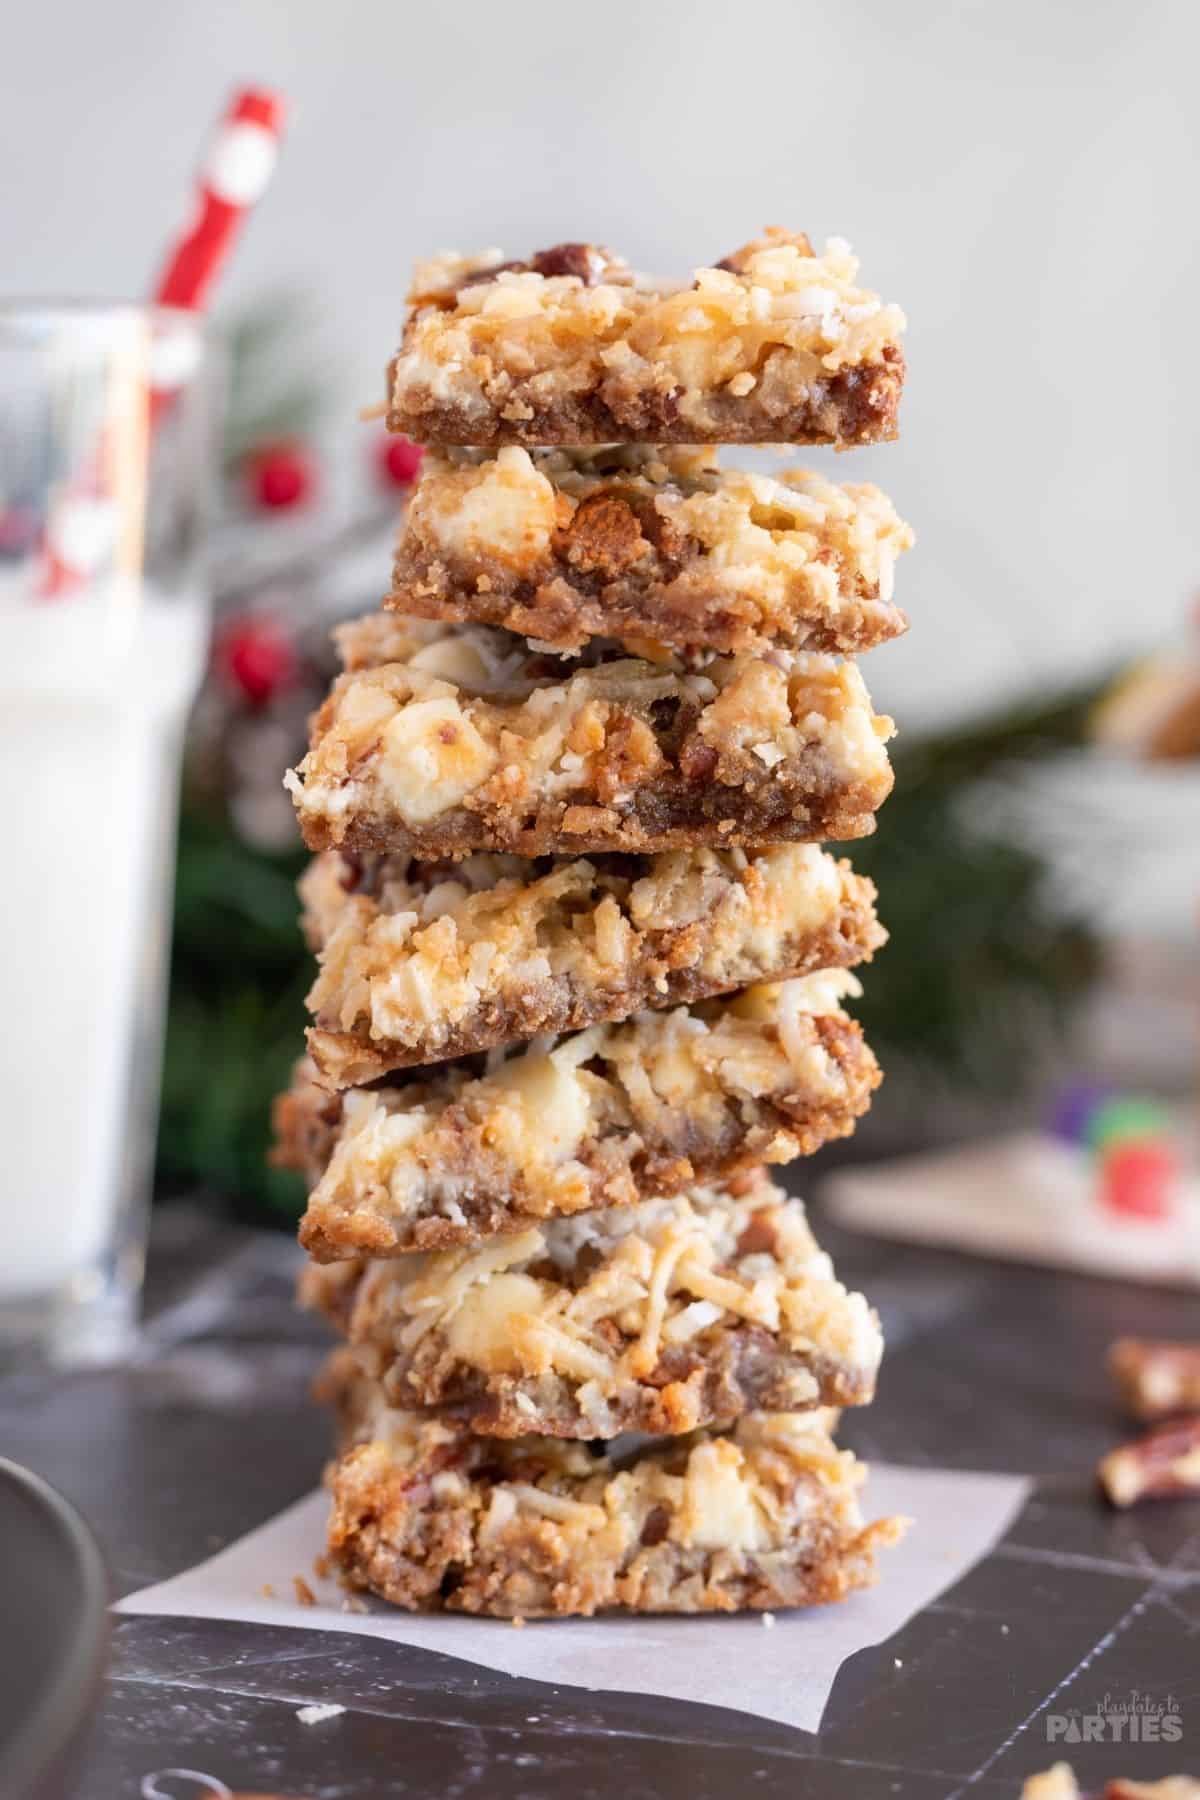 Full of the warm winter spices, gingerbread magic bars are a delicious holiday twist on the classic seven layer bars recipe.